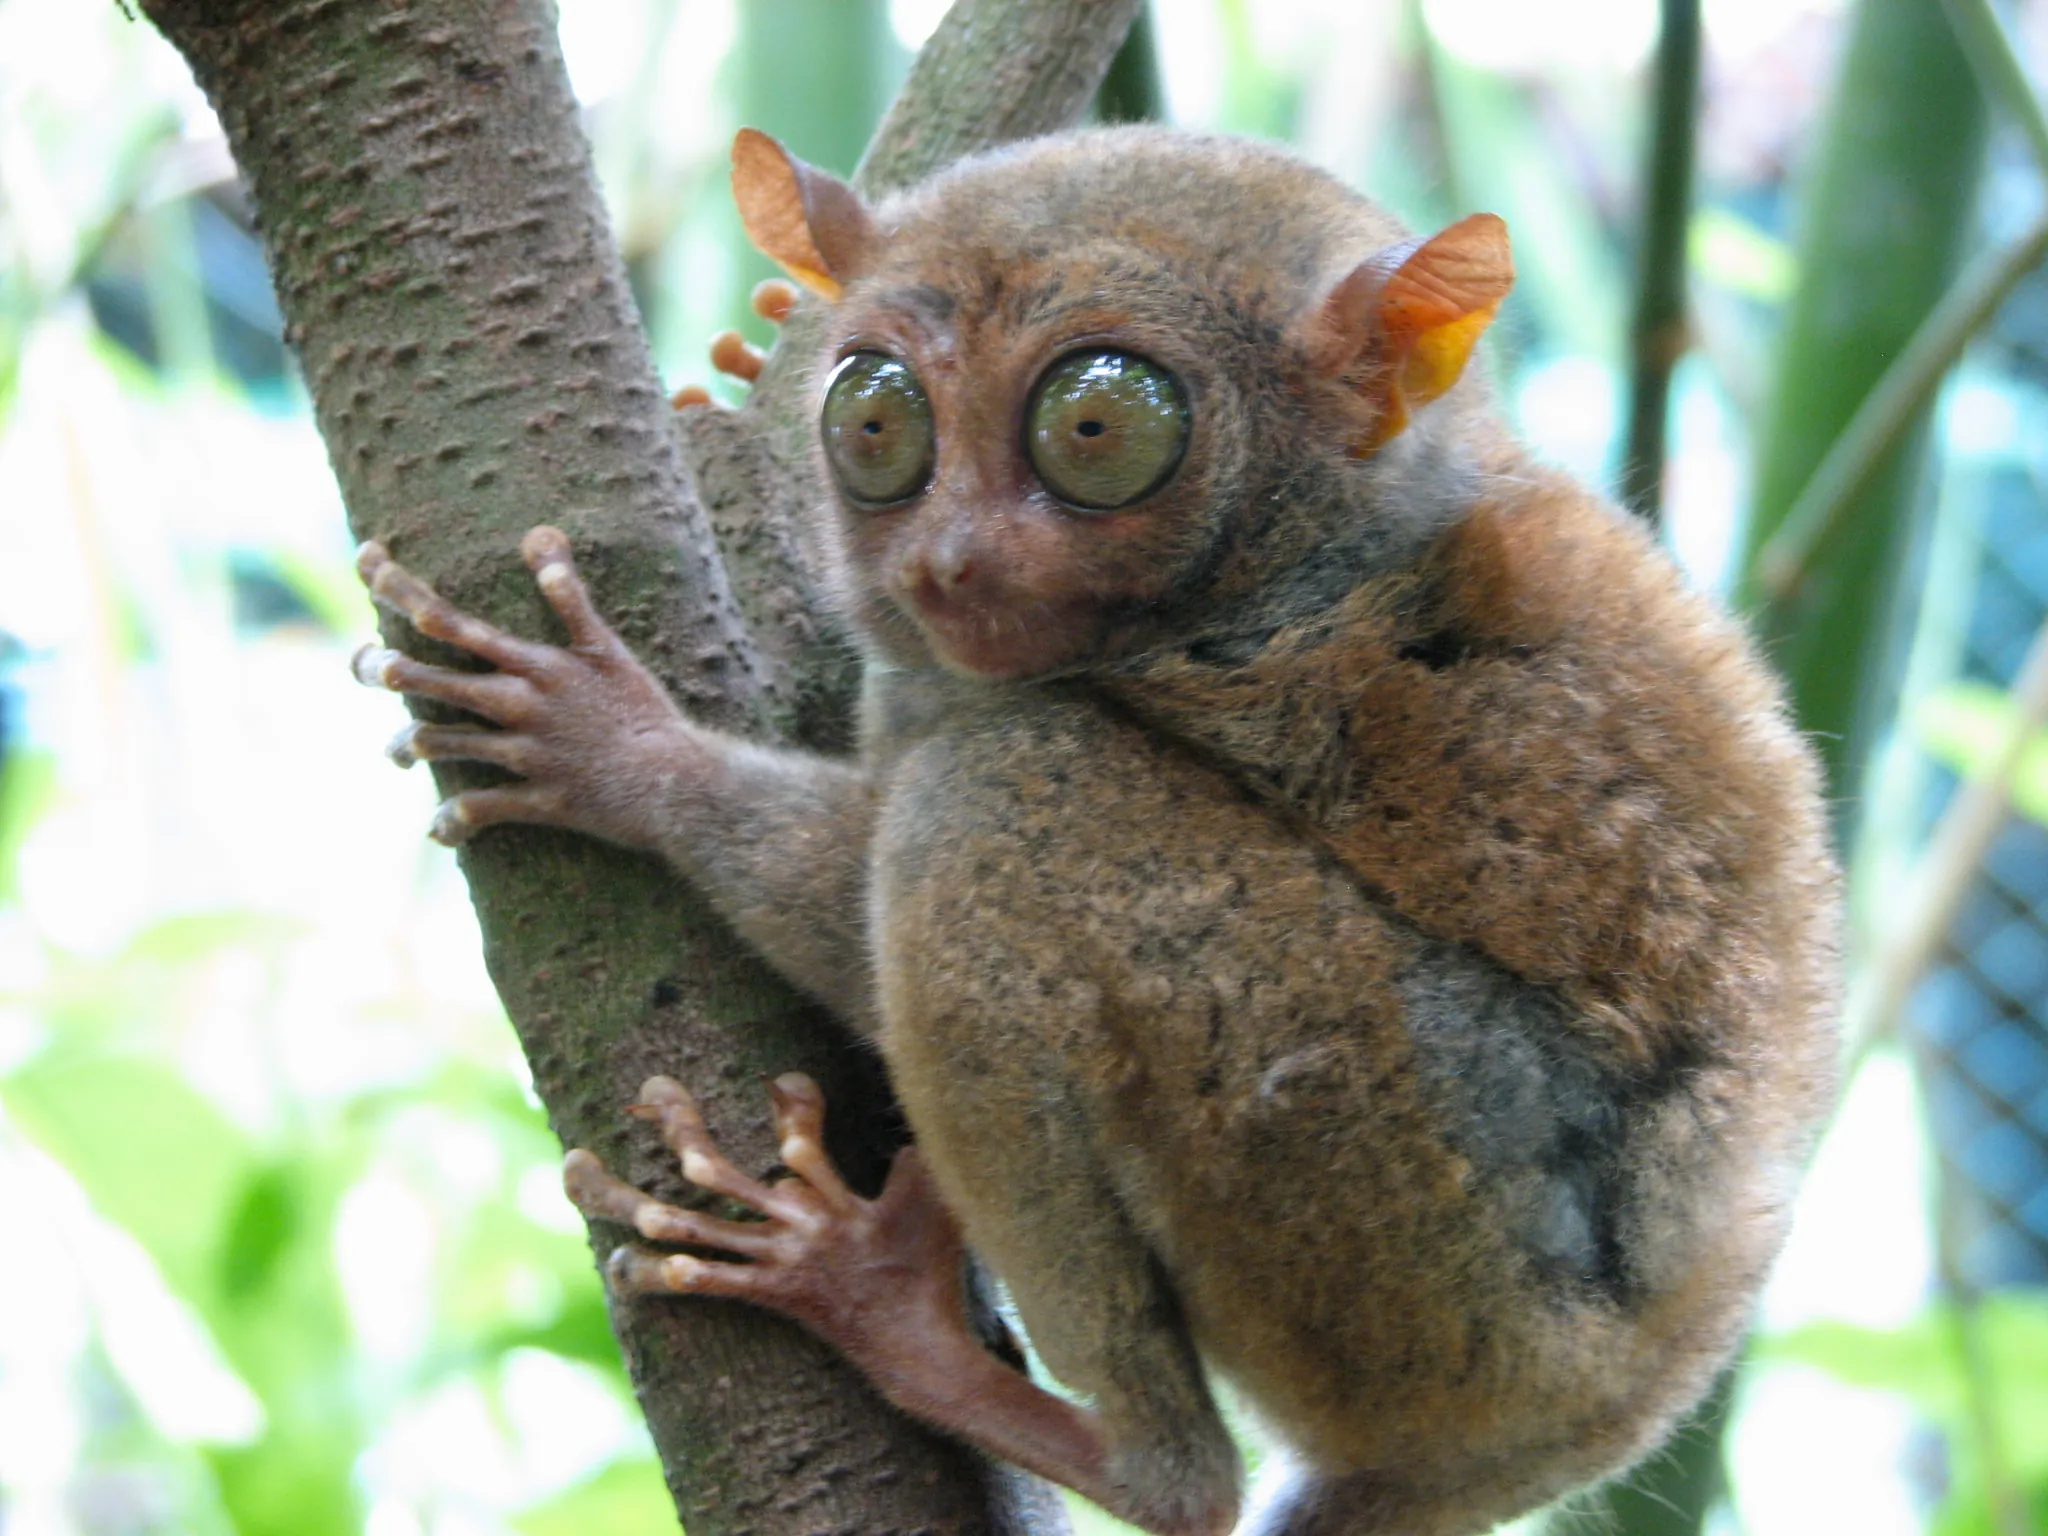 Image depicts a Tarsier in a tree.